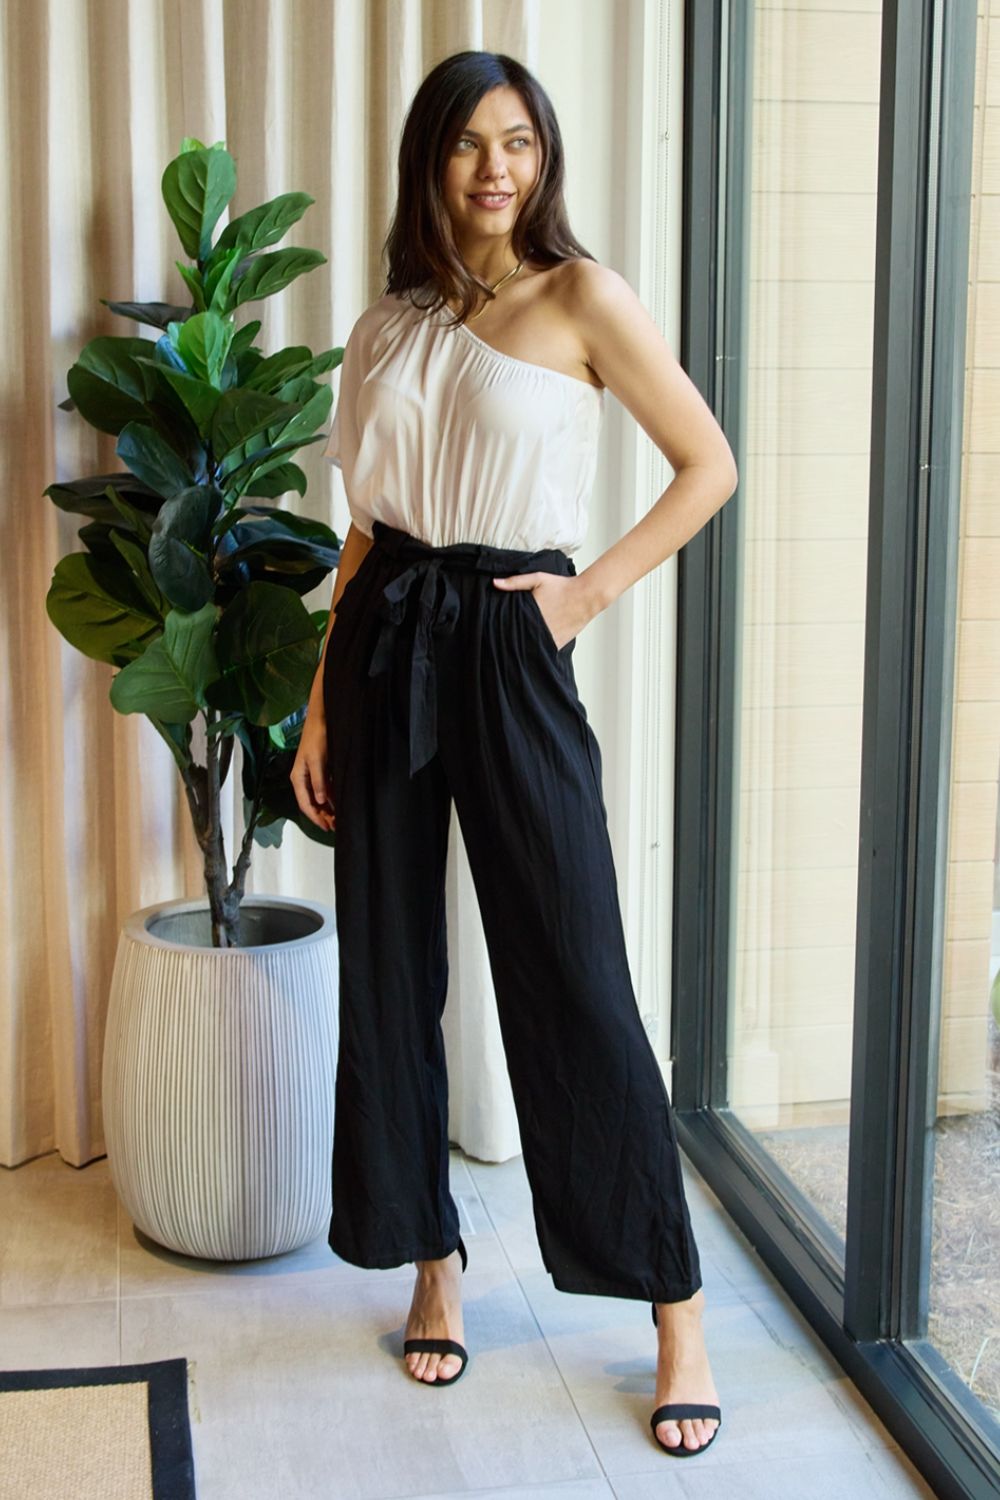 Dress Day Marvelous in Manhattan One-Shoulder Jumpsuit in White/Black Dress Day